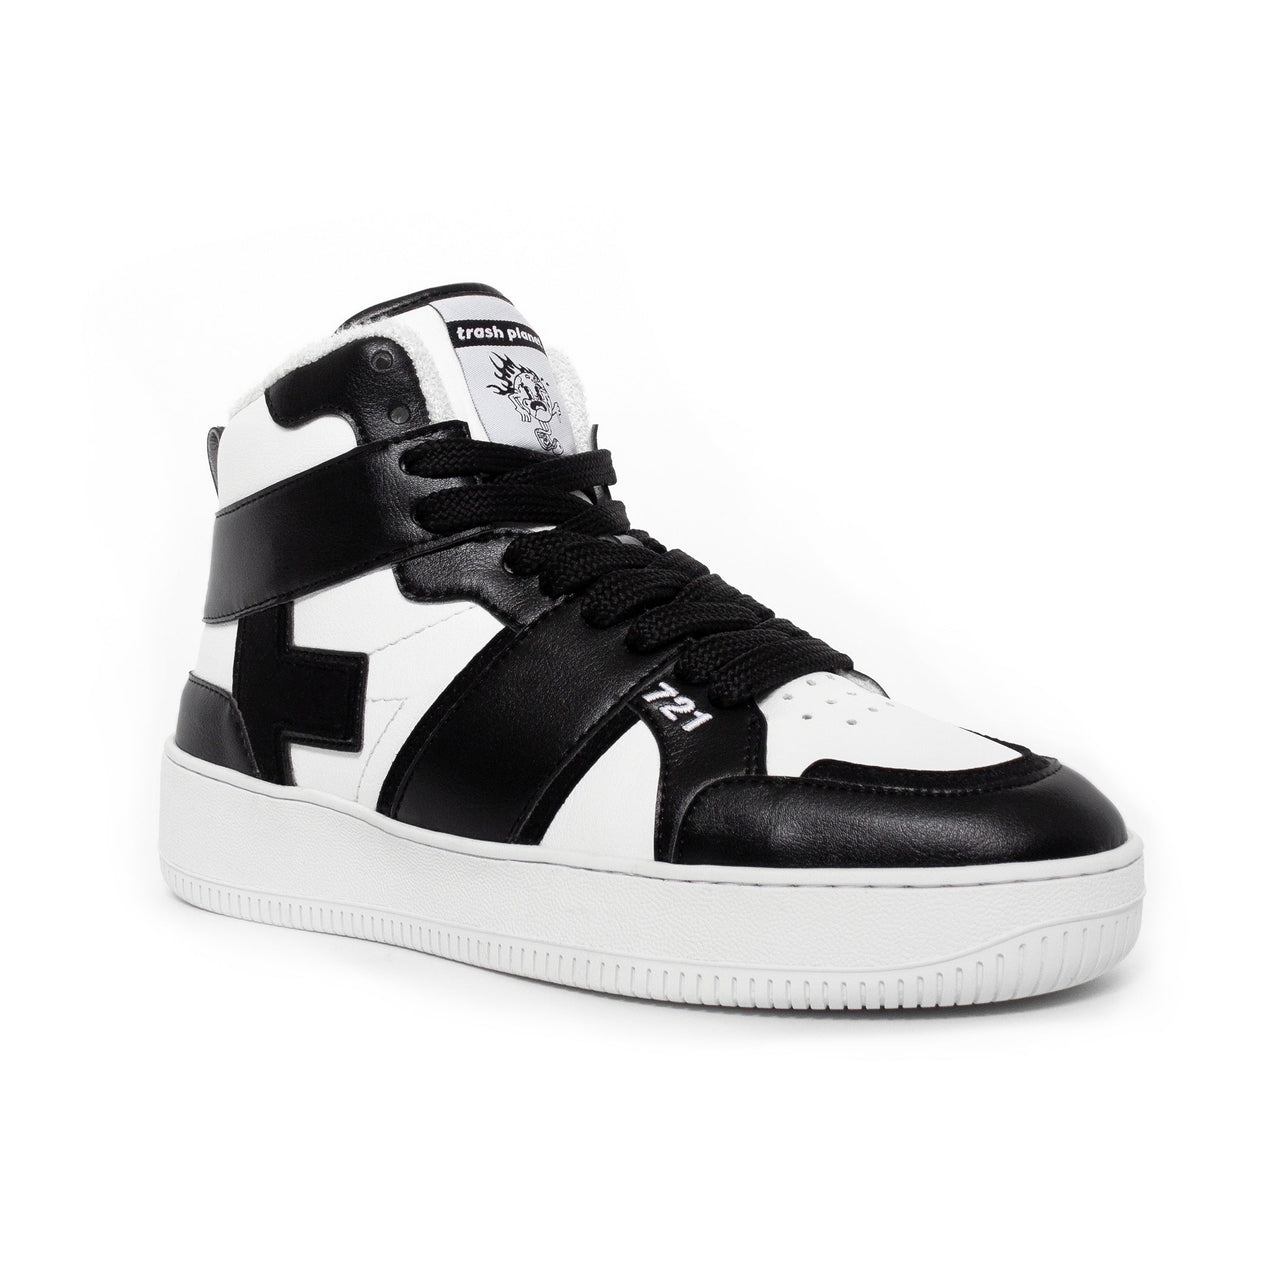 Side view of a recycled vegan corn leather Black High Top sneaker by Trash Planet